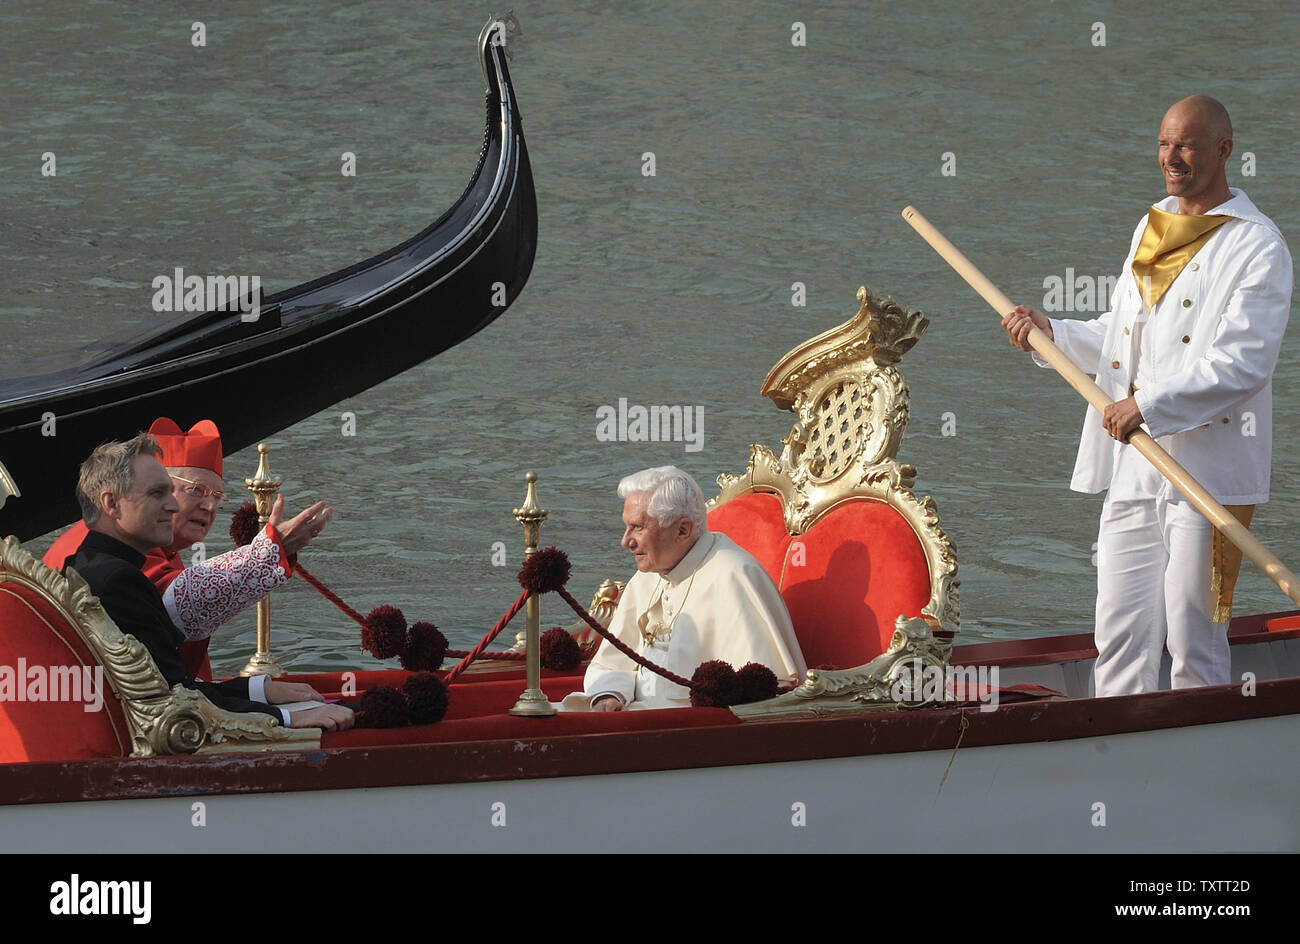 Pope Benedict XVI sits in a gondola in the Grand Canal during his pastoral visit to Aquilea and Venice, Italy on May 8, 2011. Pope Benedict XVI is in Venice for a weekend vist that will highlight the Christian heritage of this crossroads of Mediterranean and Eastern European history.  UPI/Stefano Spaziani Stock Photo